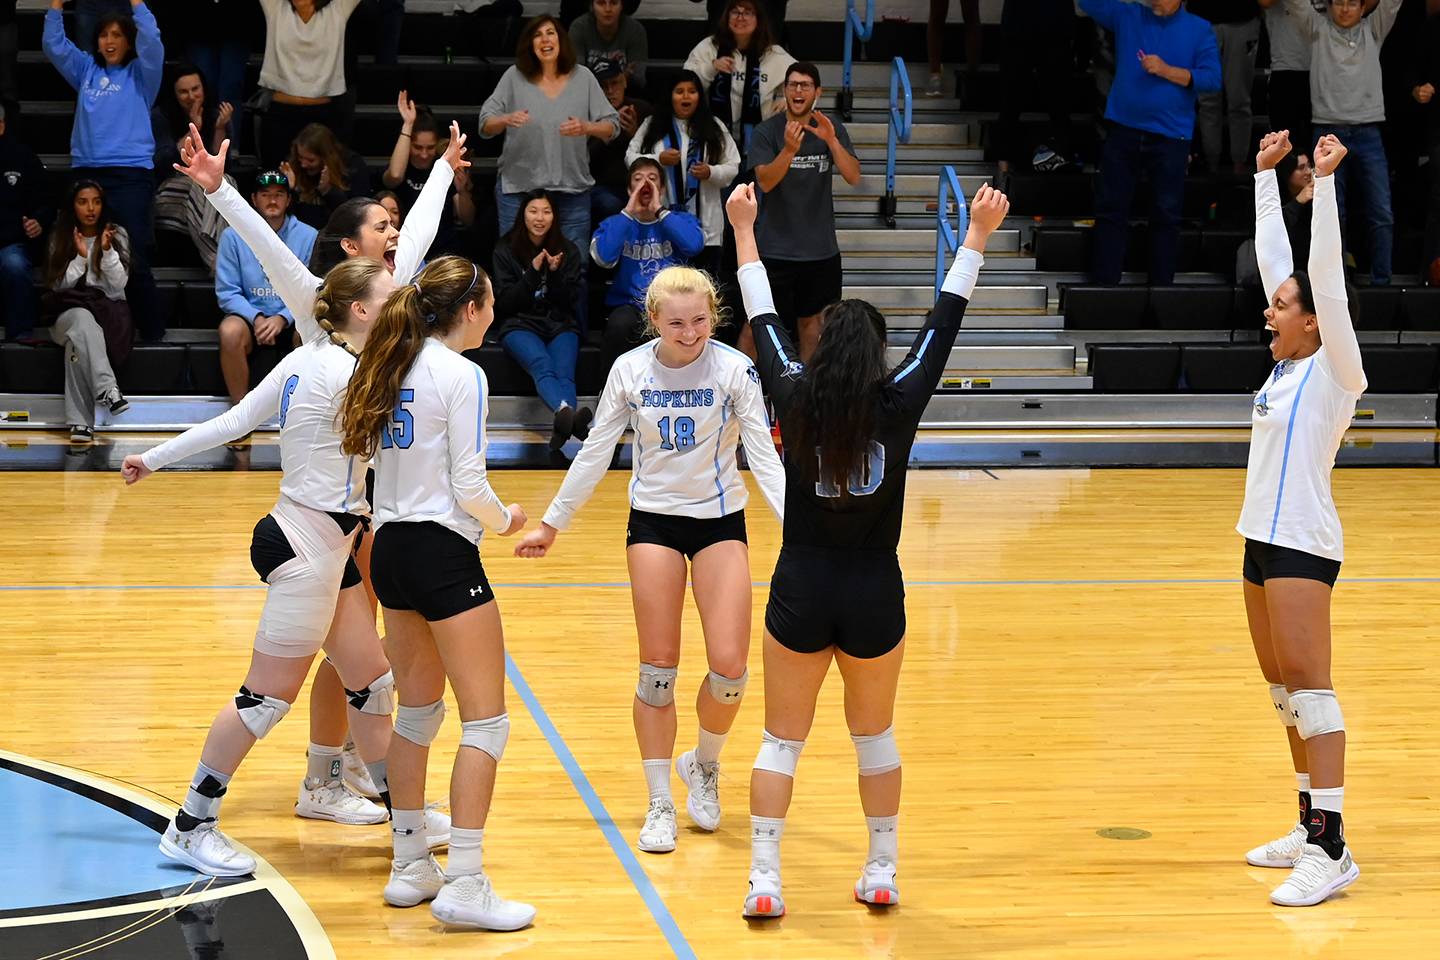 Johns Hopkins volleyball players celebrate